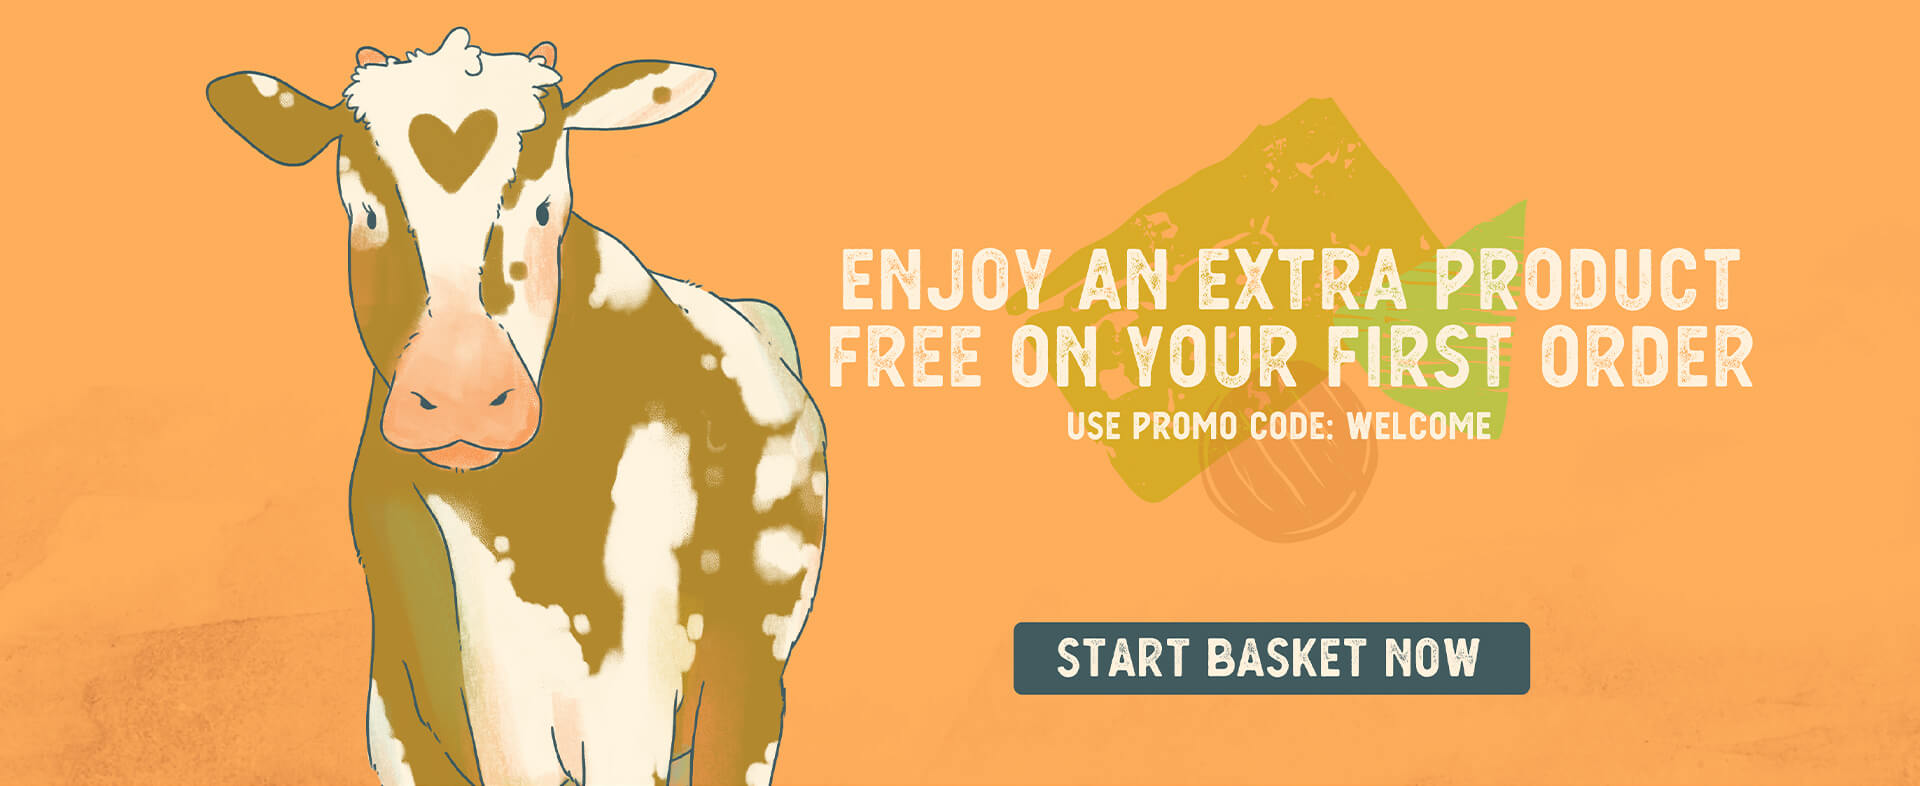 Get one product of your choice for free on your first order, use promo code: WELCOME.  Start Basket Now